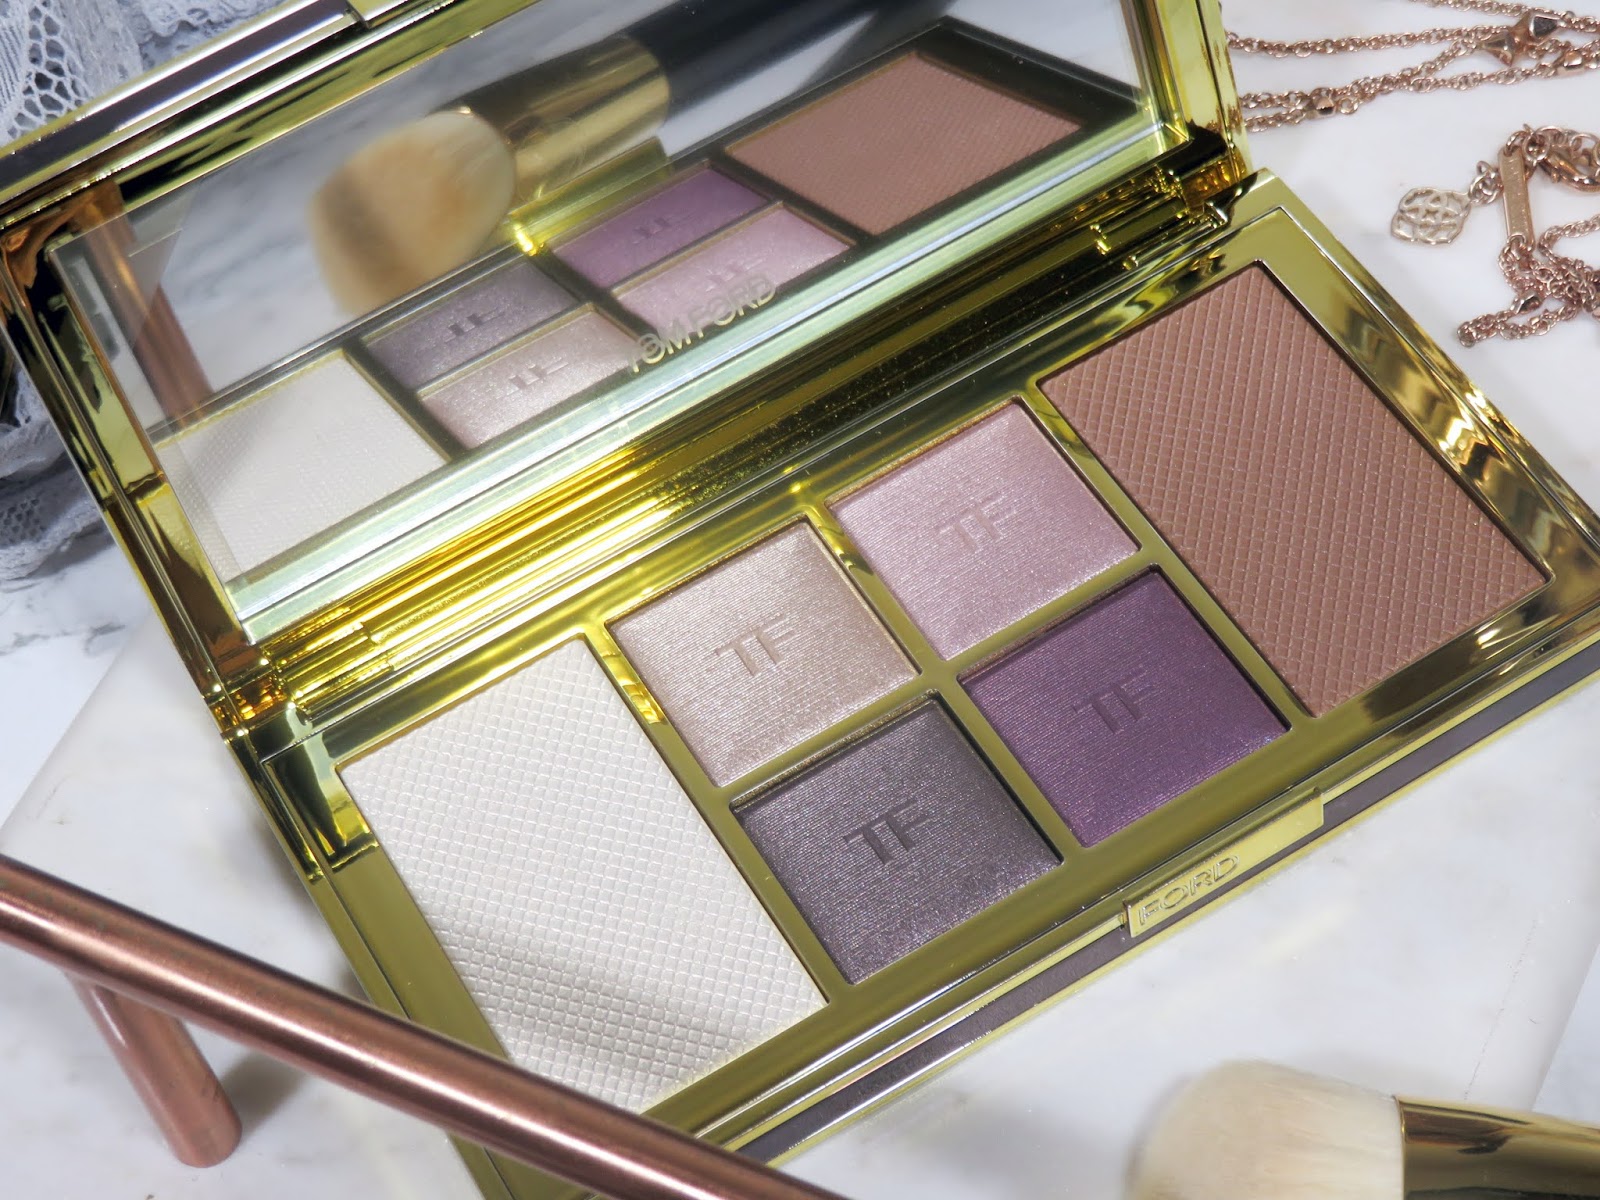 Tom Ford Shade and Illuminate Face & Eye Palette in Moonlit Violet Review and Swatches